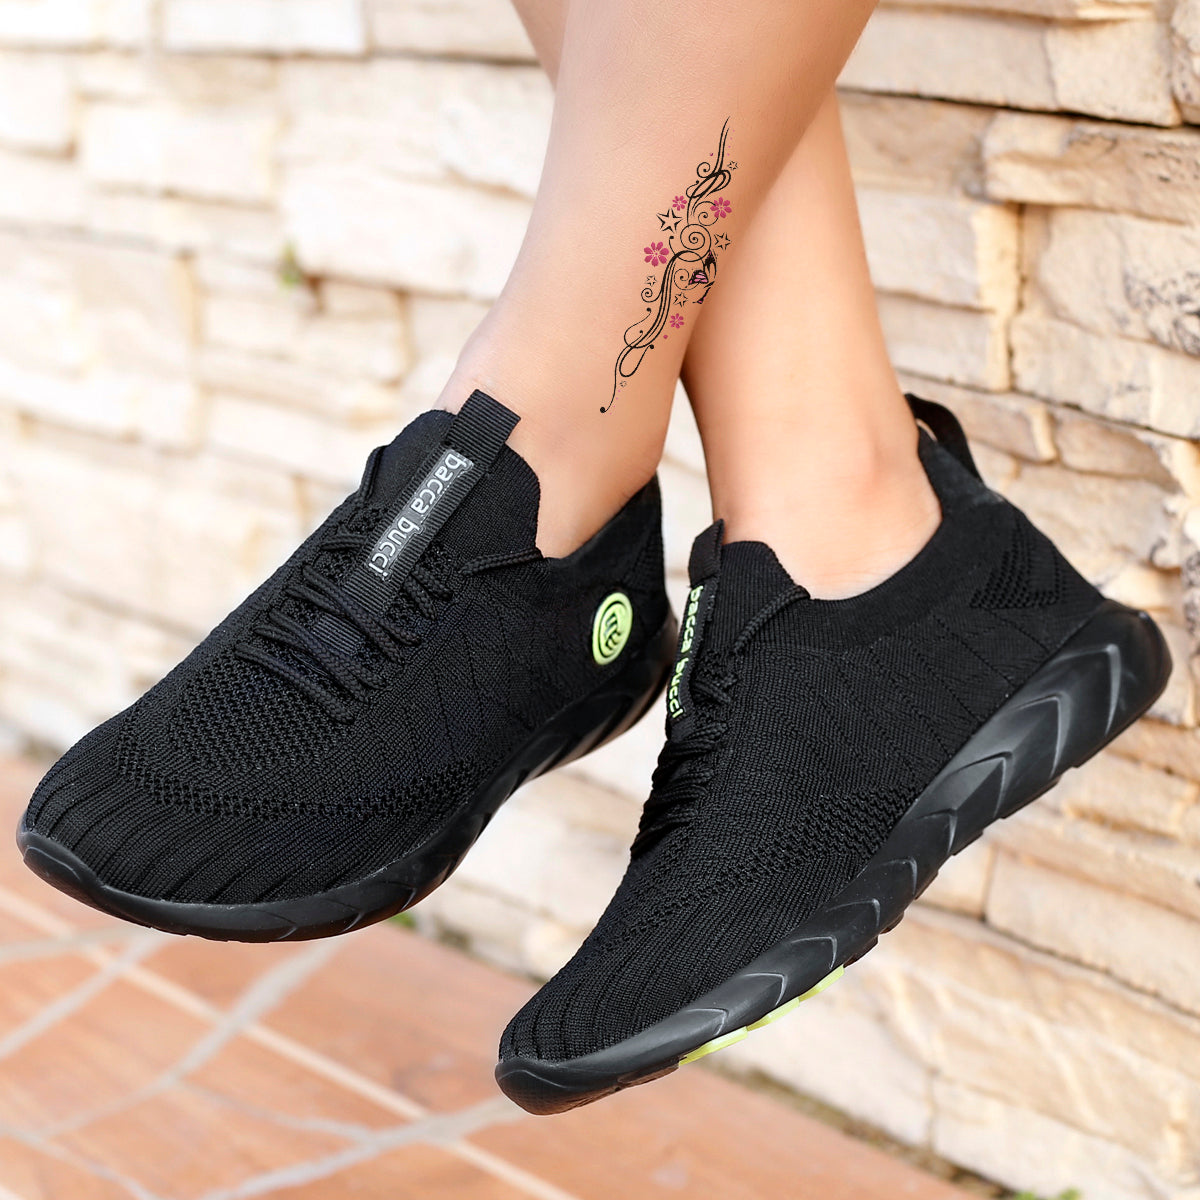 womens running shoes, casual shoes for women, gym shoes for women, sneakers for women